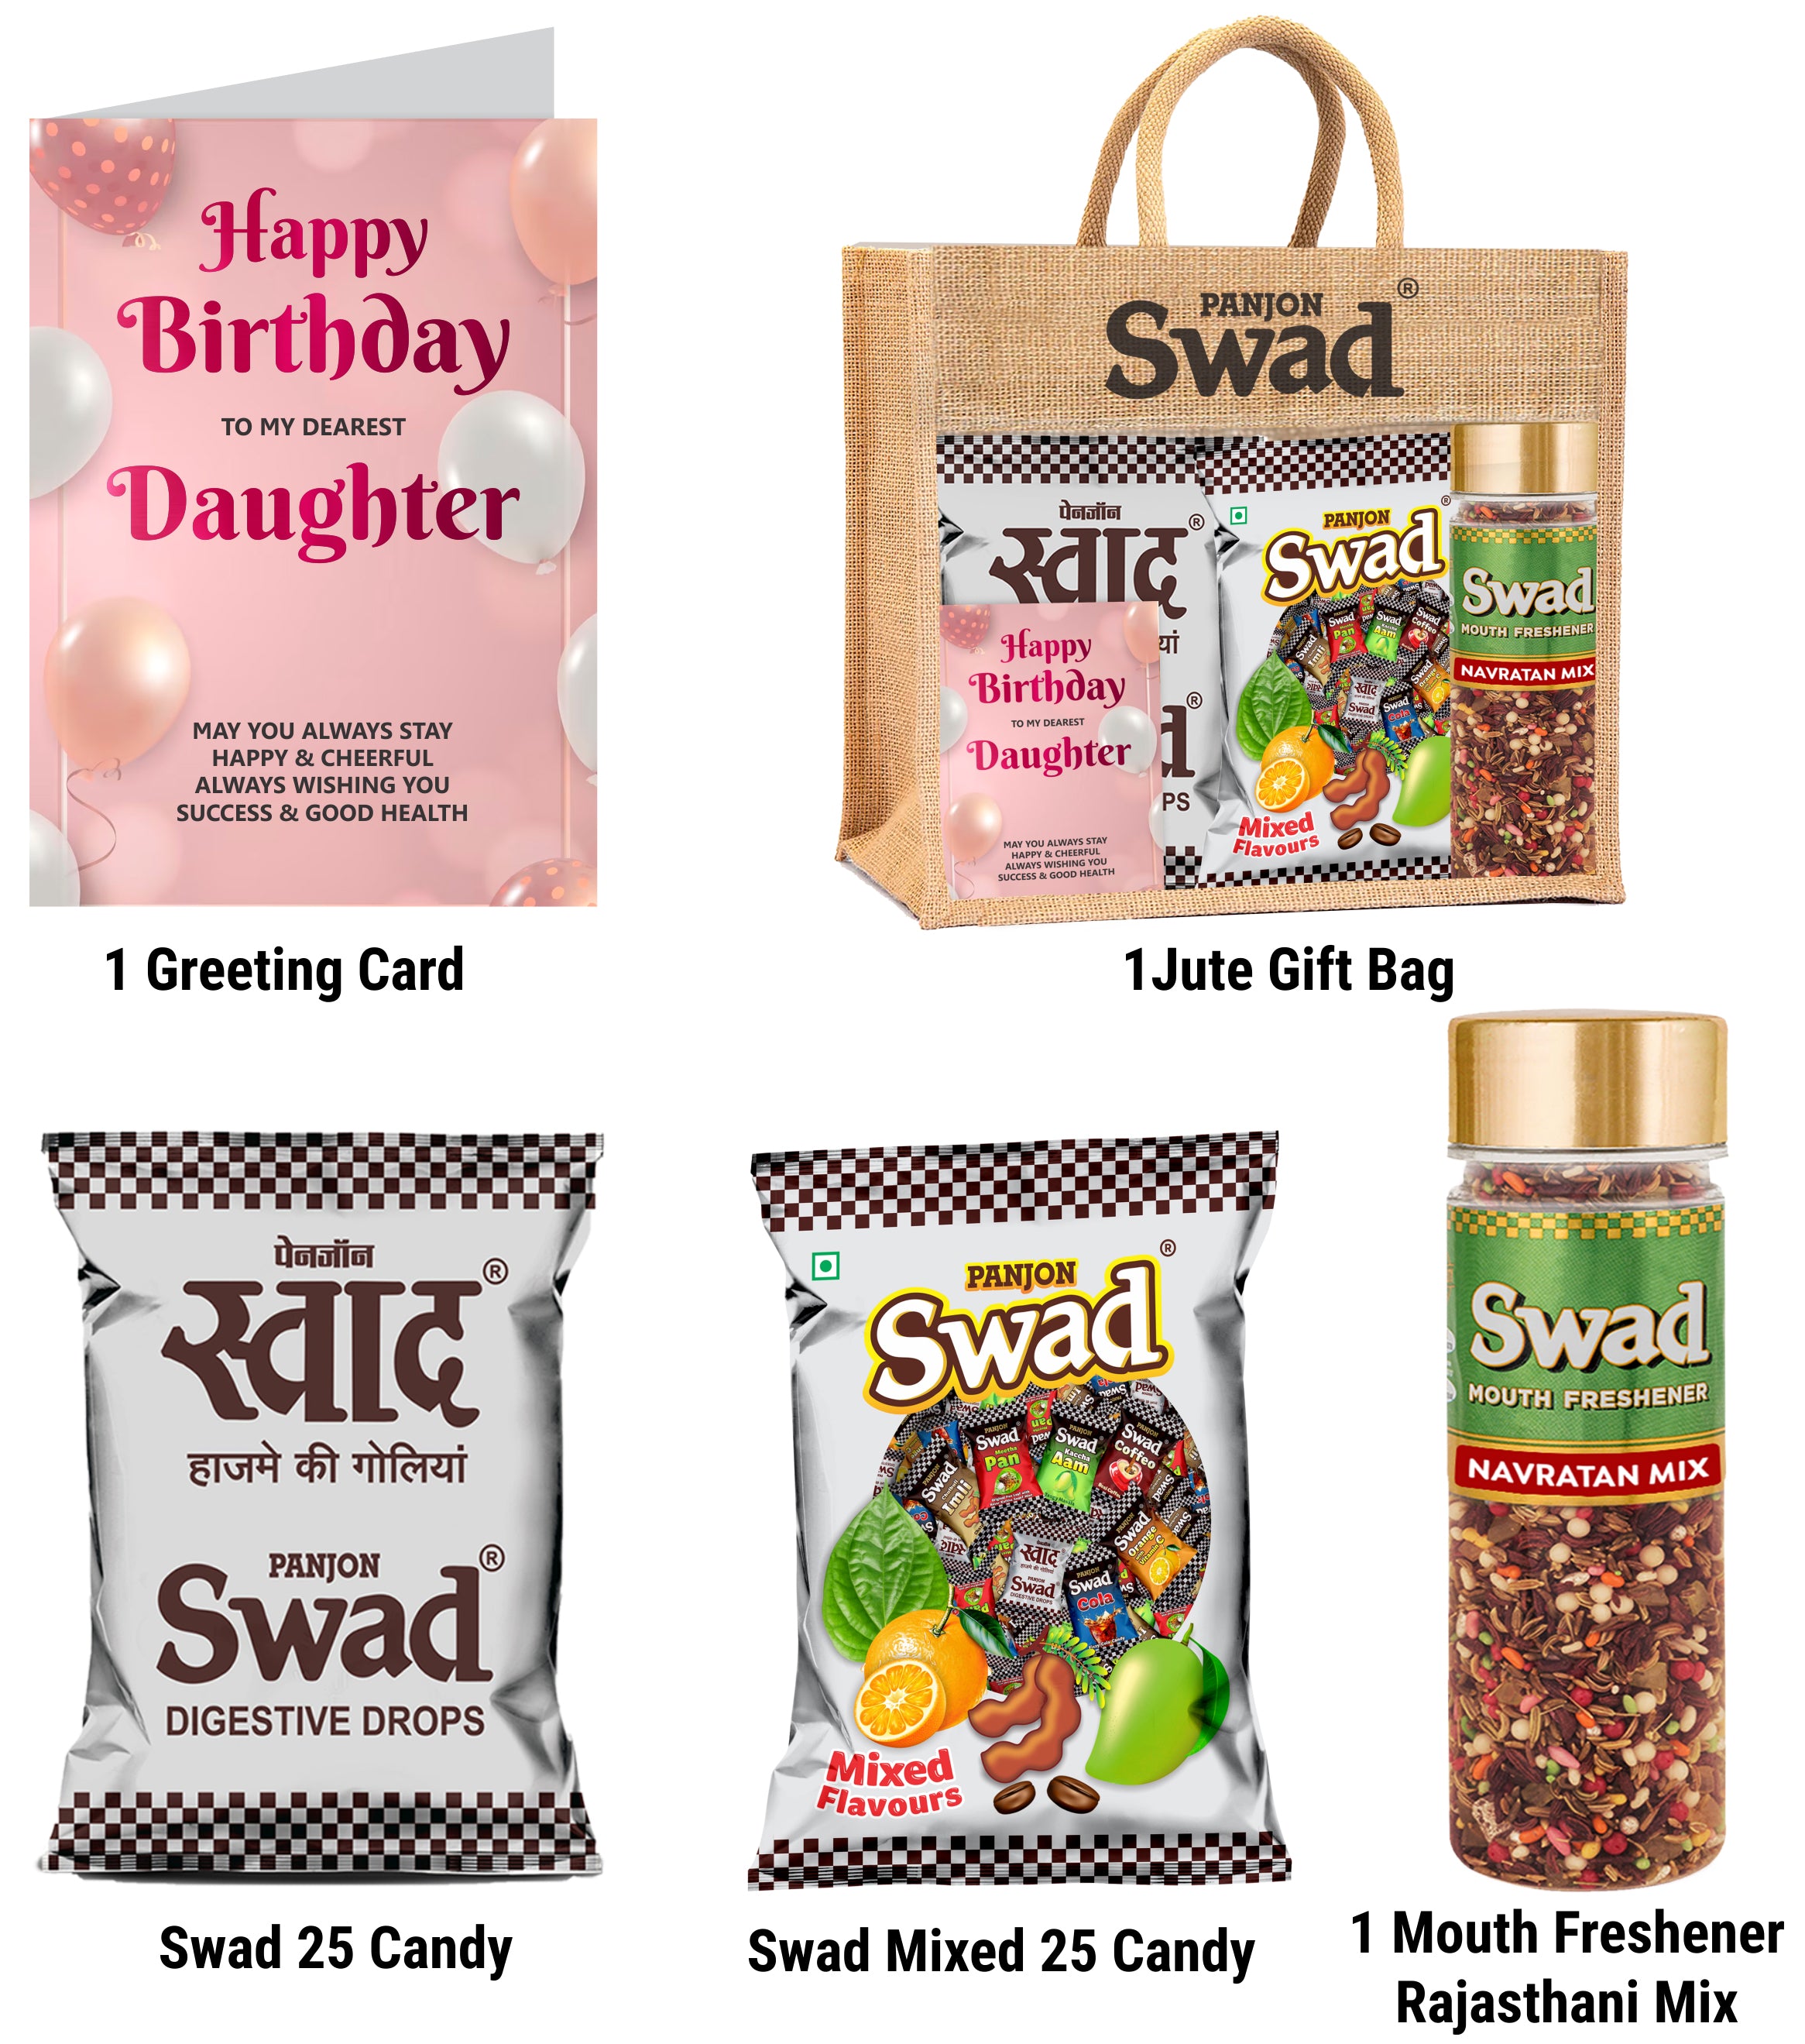 Swad Happy Birthday Gift for Daughter beti with Card (25 Swad Candy, 25 Mixed Toffee, Navratan Mukhwas) in Jute Bag